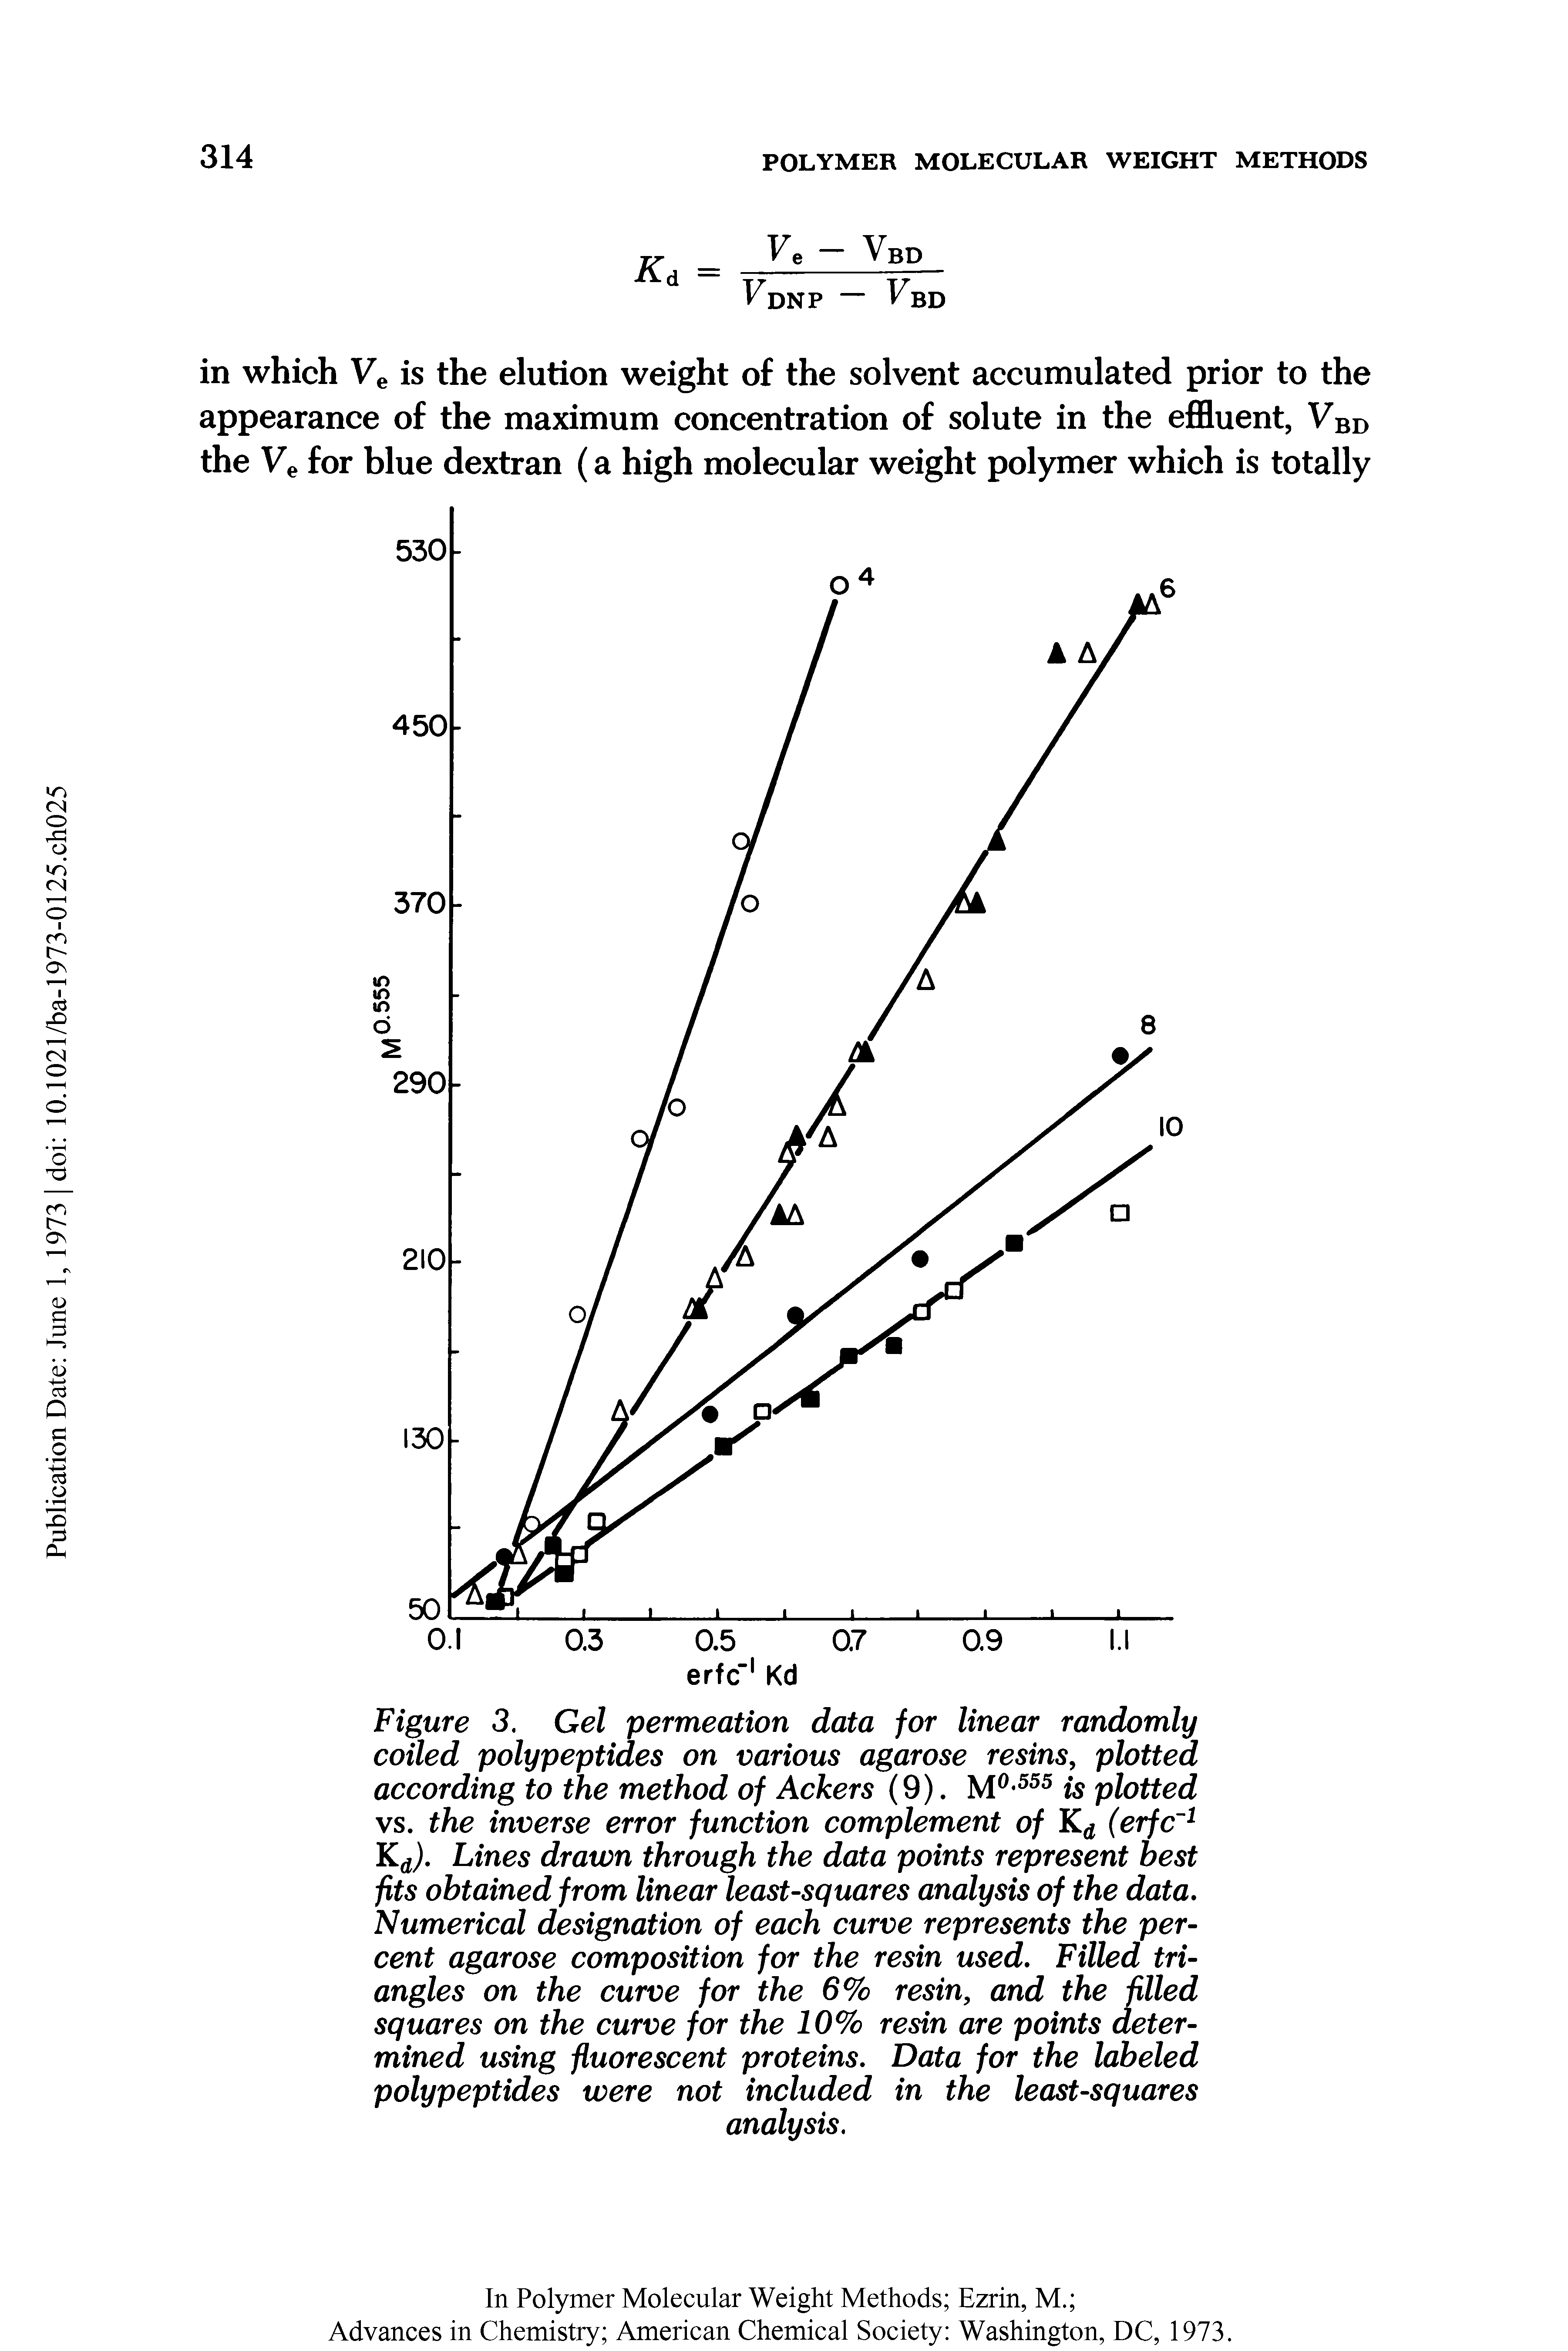 Figure 3. Gel permeation data for linear randomly coiled polypeptides on various agarose resins, plotted according to the method of Ackers (9). M0 555 is plotted vs. the inverse error function complement of Kd (erfc 1 Kd). Lines drawn through the data points represent best fits obtained from linear least-squares analysis of the data. Numerical designation of each curve represents the percent agarose composition for the resin used. Filled triangles on the curve for the 6% resin, and the filled squares on the curve for the 10% resin are points determined using fluorescent proteins. Data for the labeled polypeptides were not included in the least-squares analysis.